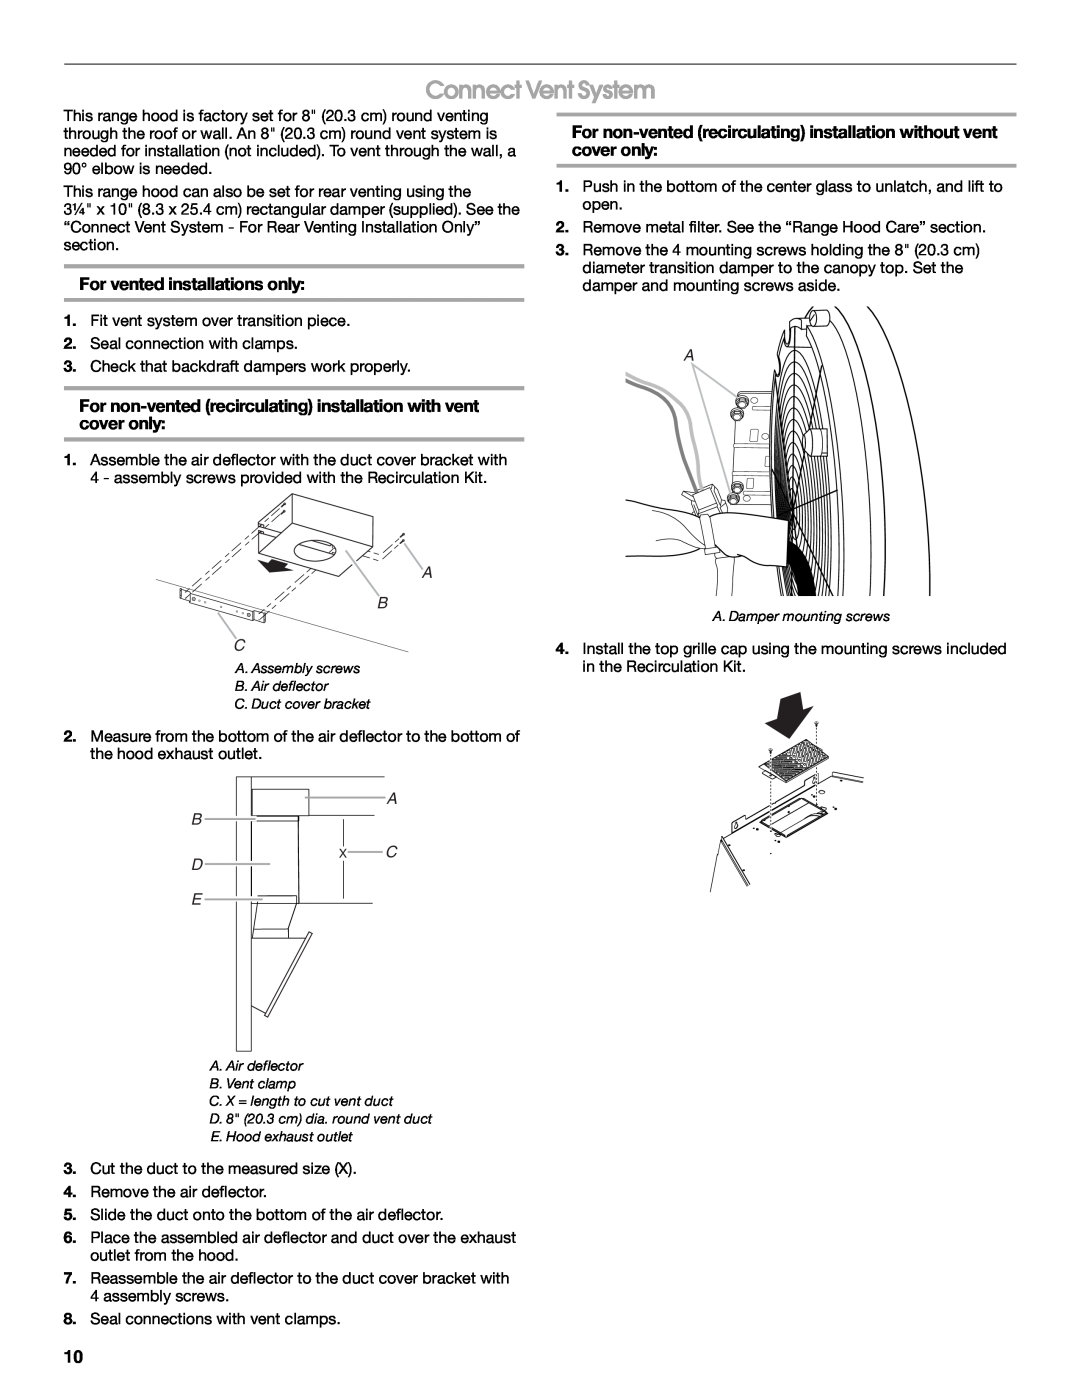 Jenn-Air LI3URB/W10274314C installation instructions Connect Vent System, For vented installations only 